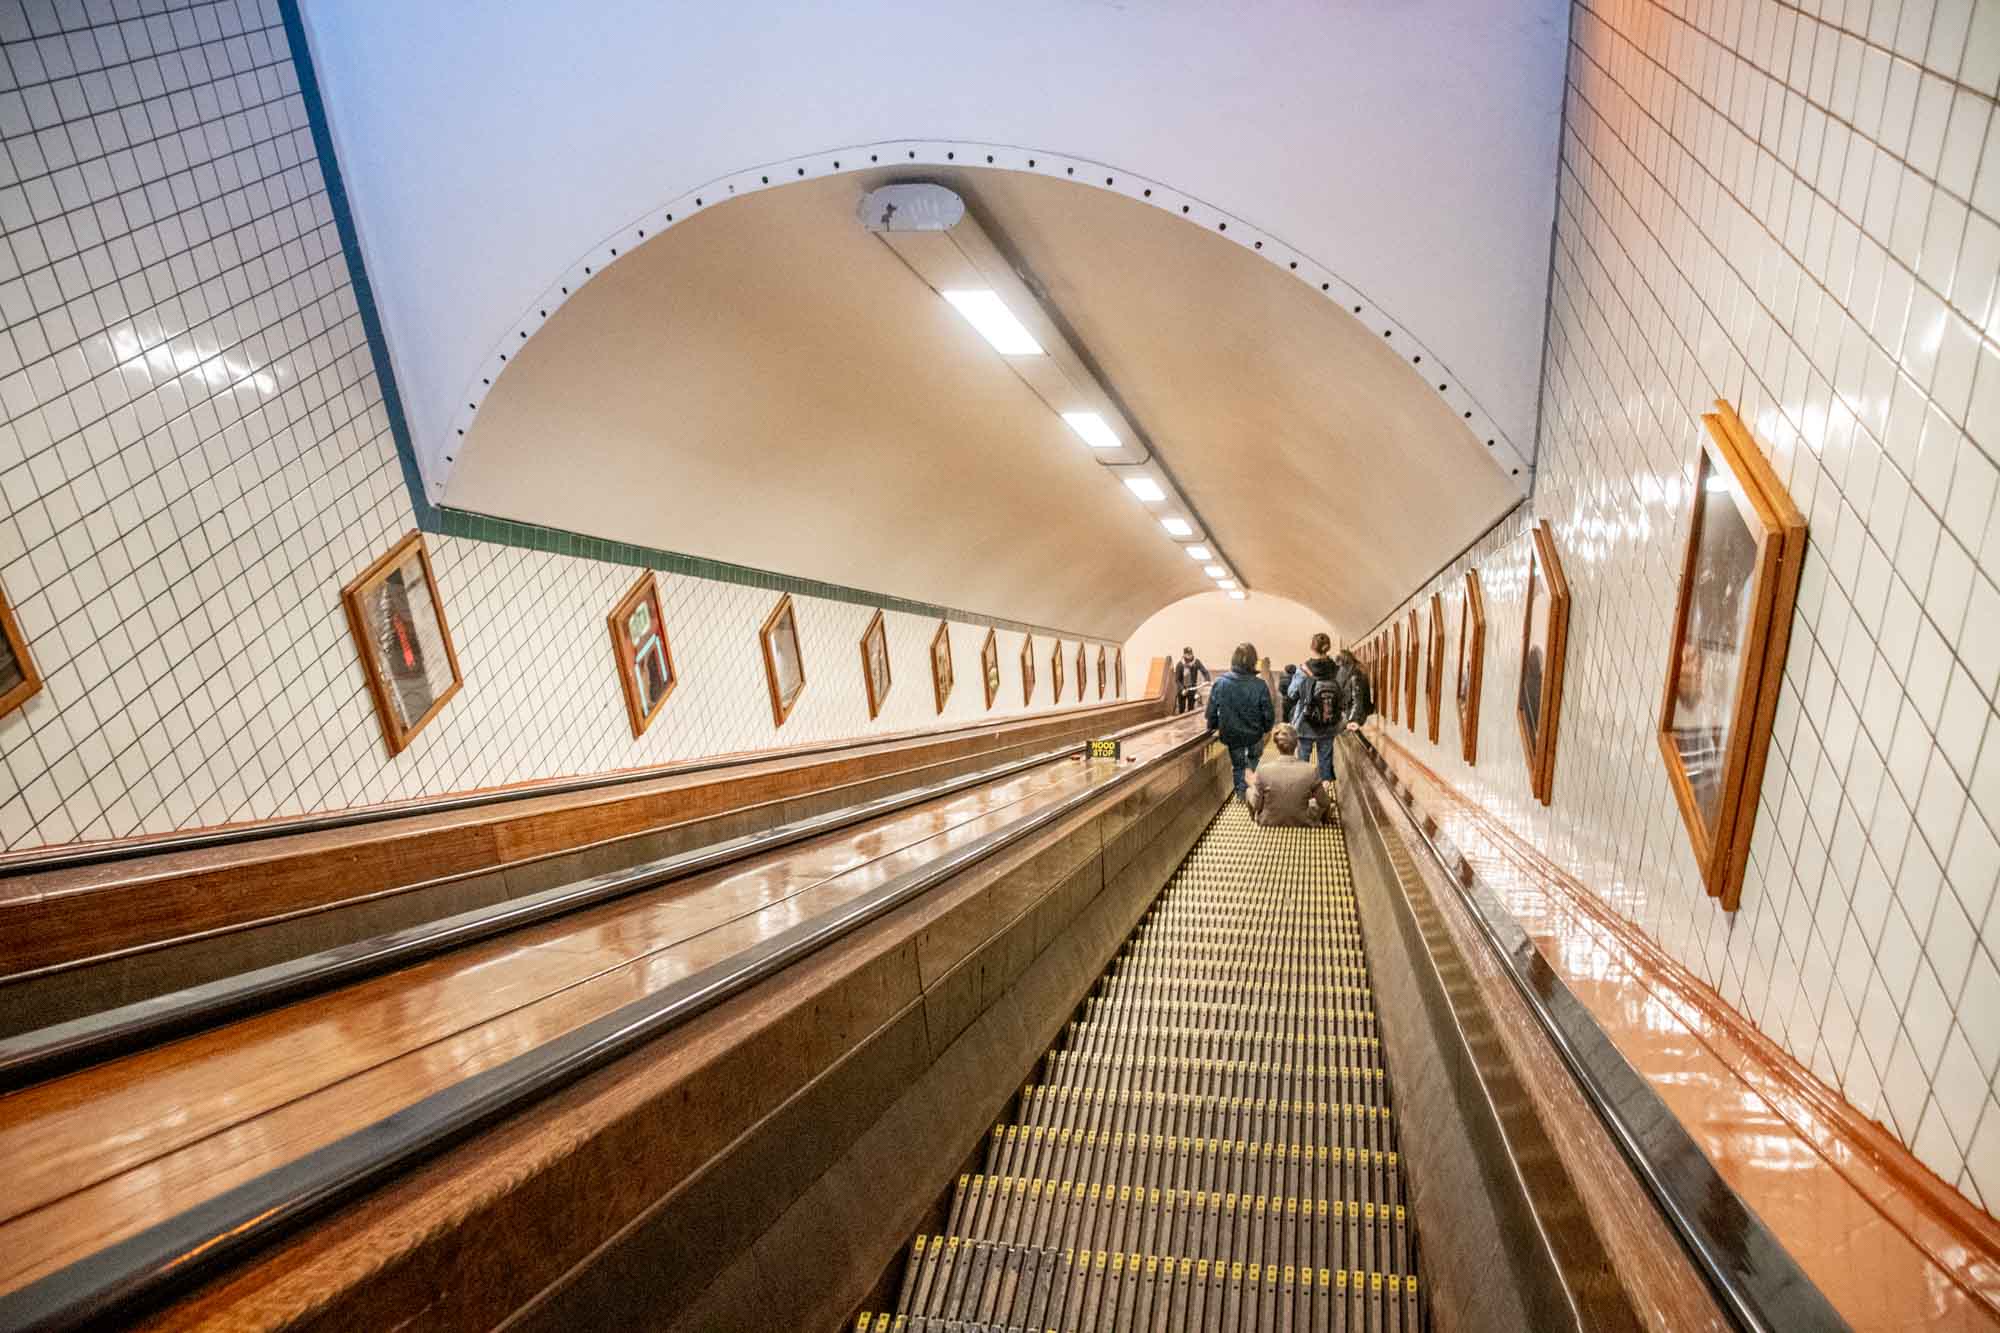 Wooden escalator descending deep into a tunnel with white tile on the walls